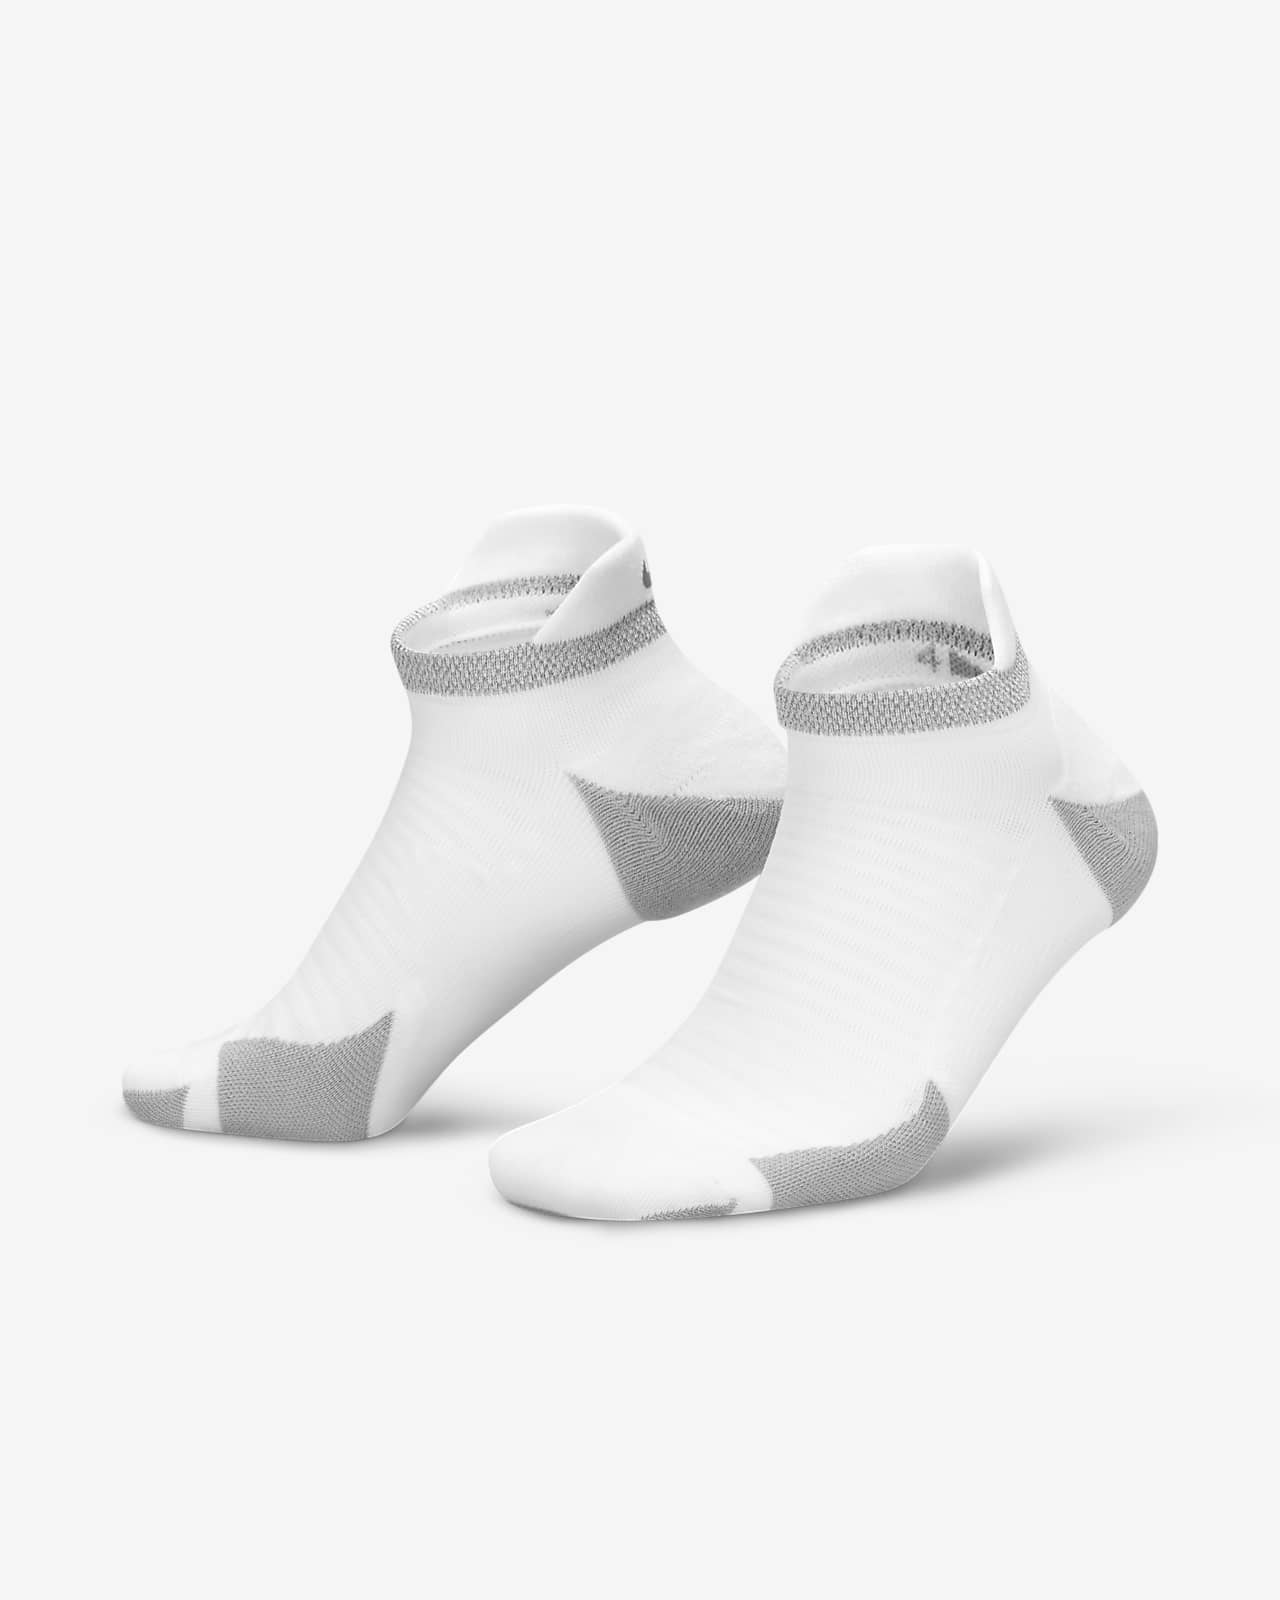 Calcetines invisibles de running acolchados Nike Spark